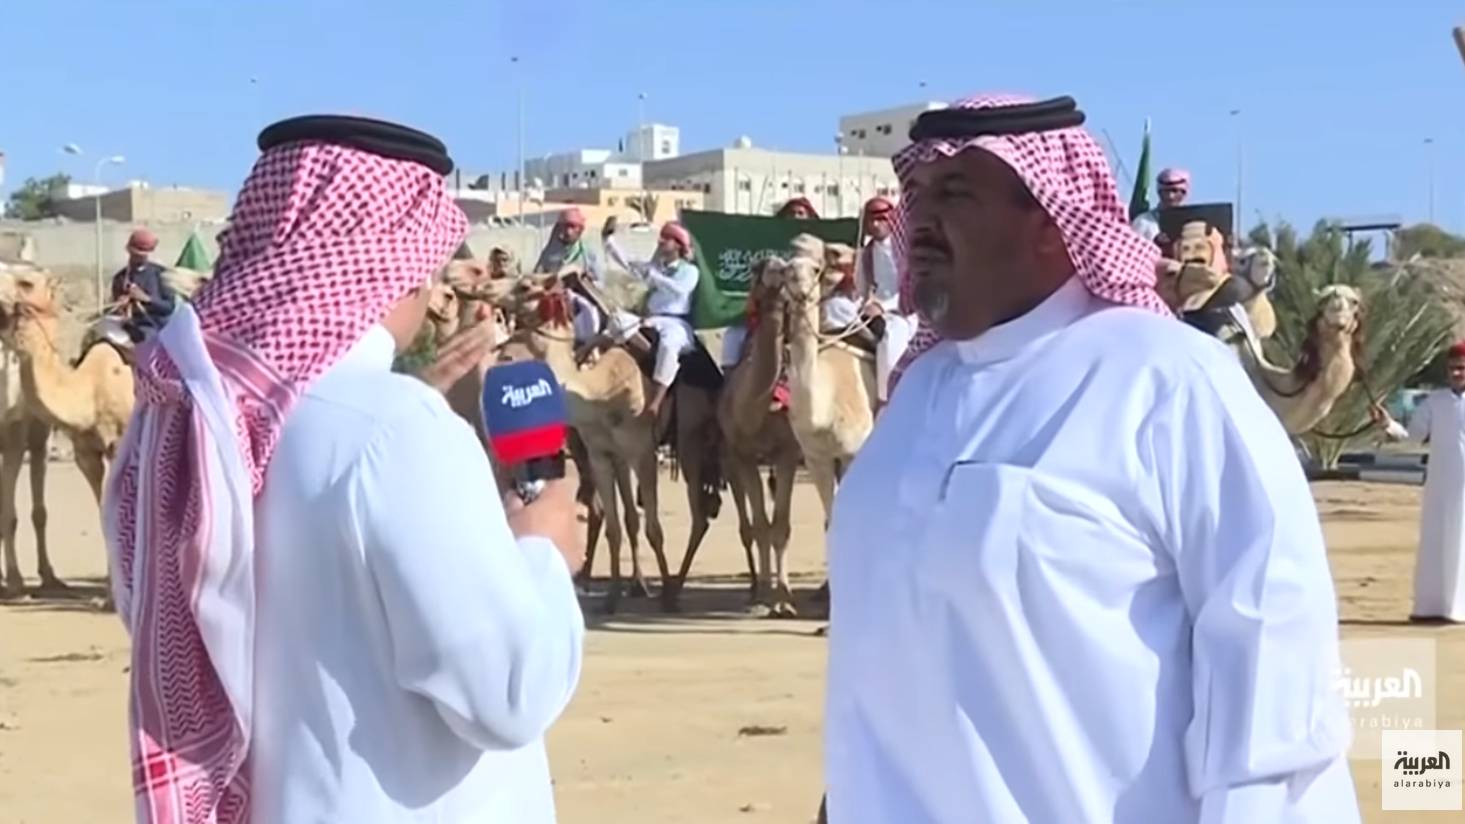 The Hawaitat tribe organized a march on the camel as part of the legacy of the area. The marchers carried Saudi flags in an expression of the keenness of the Al-Huwaitat tribe on the unity of the rank and loyalty to the wise leadership. — Courtesy photo